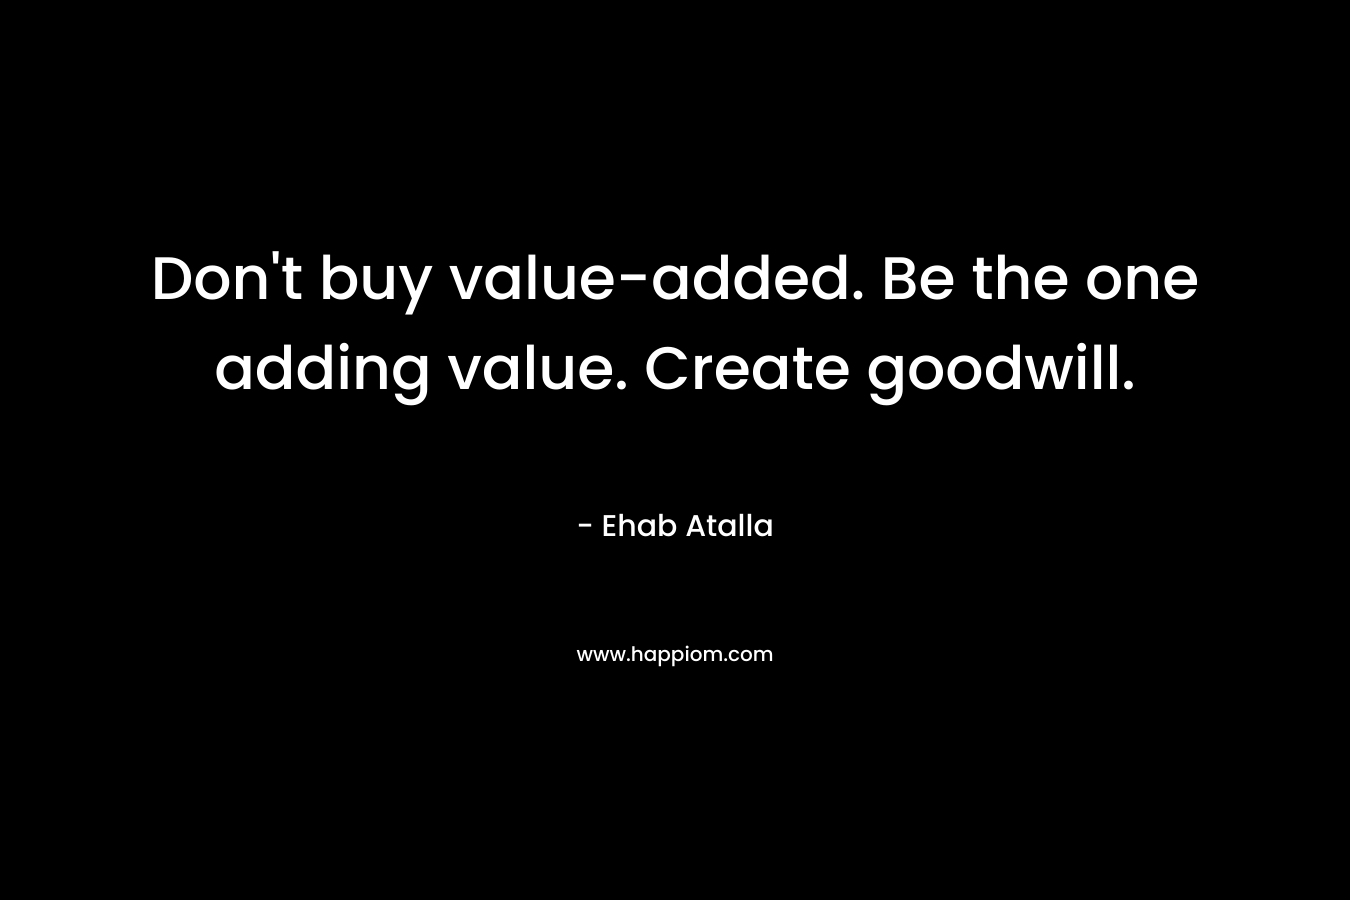 Don’t buy value-added. Be the one adding value. Create goodwill. – Ehab Atalla